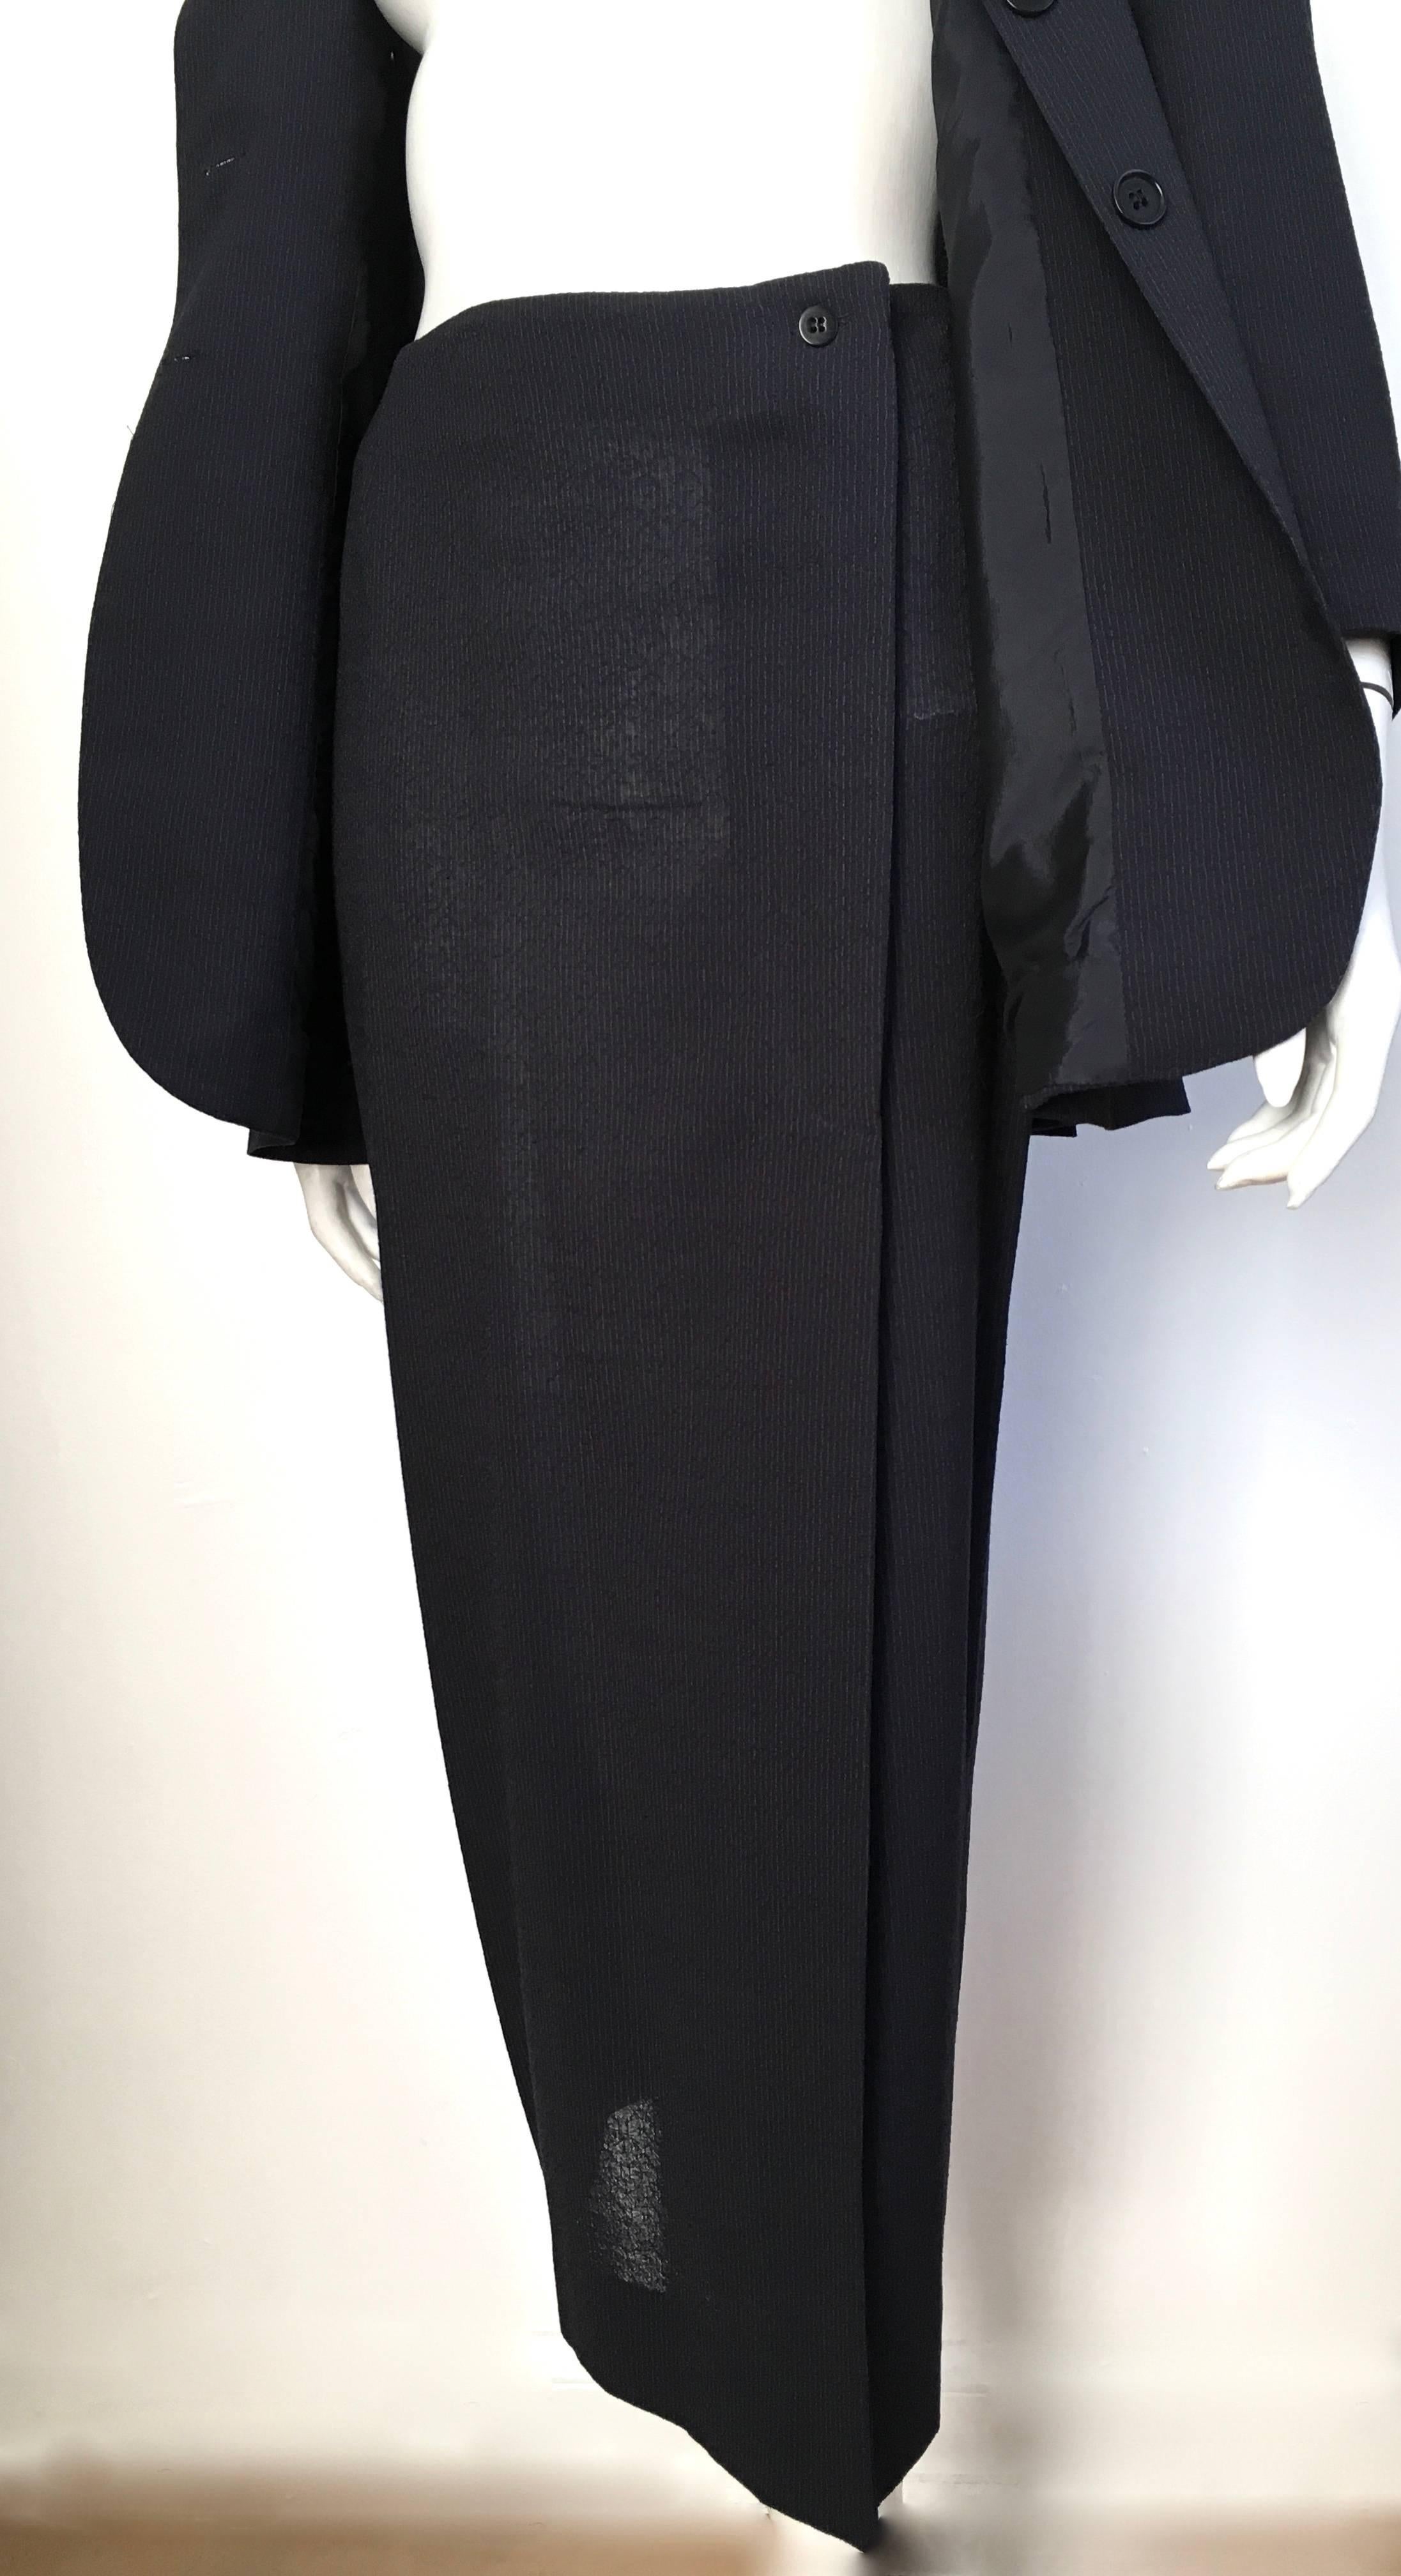 Romeo Gigli 1980s Wool Navy Jacket & Wrap Skirt Suit Size 6. For Sale 2